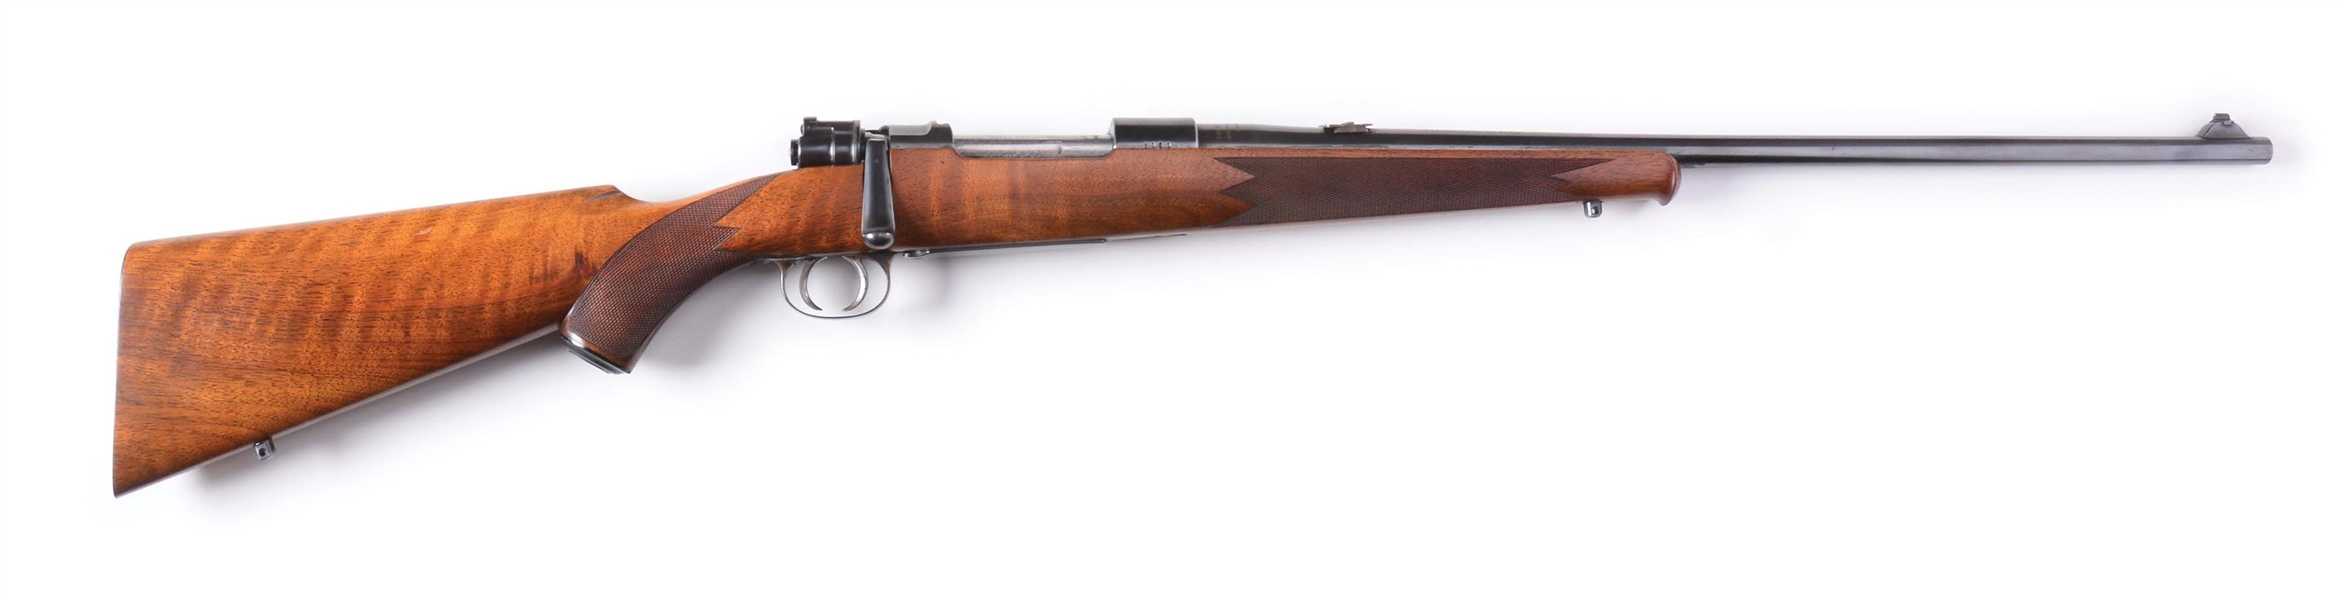 (C) EXCEPTIONALLY RARE (ESTIMATED FAR FEWER THAN 100 IMPORTED) CHARLES NEWTON RIFLE CORPORATION MODEL 1922 BOLT ACTION SPORTING RIFLE WITH A HIGH DEGREE OF ORIGINAL FINISH. 